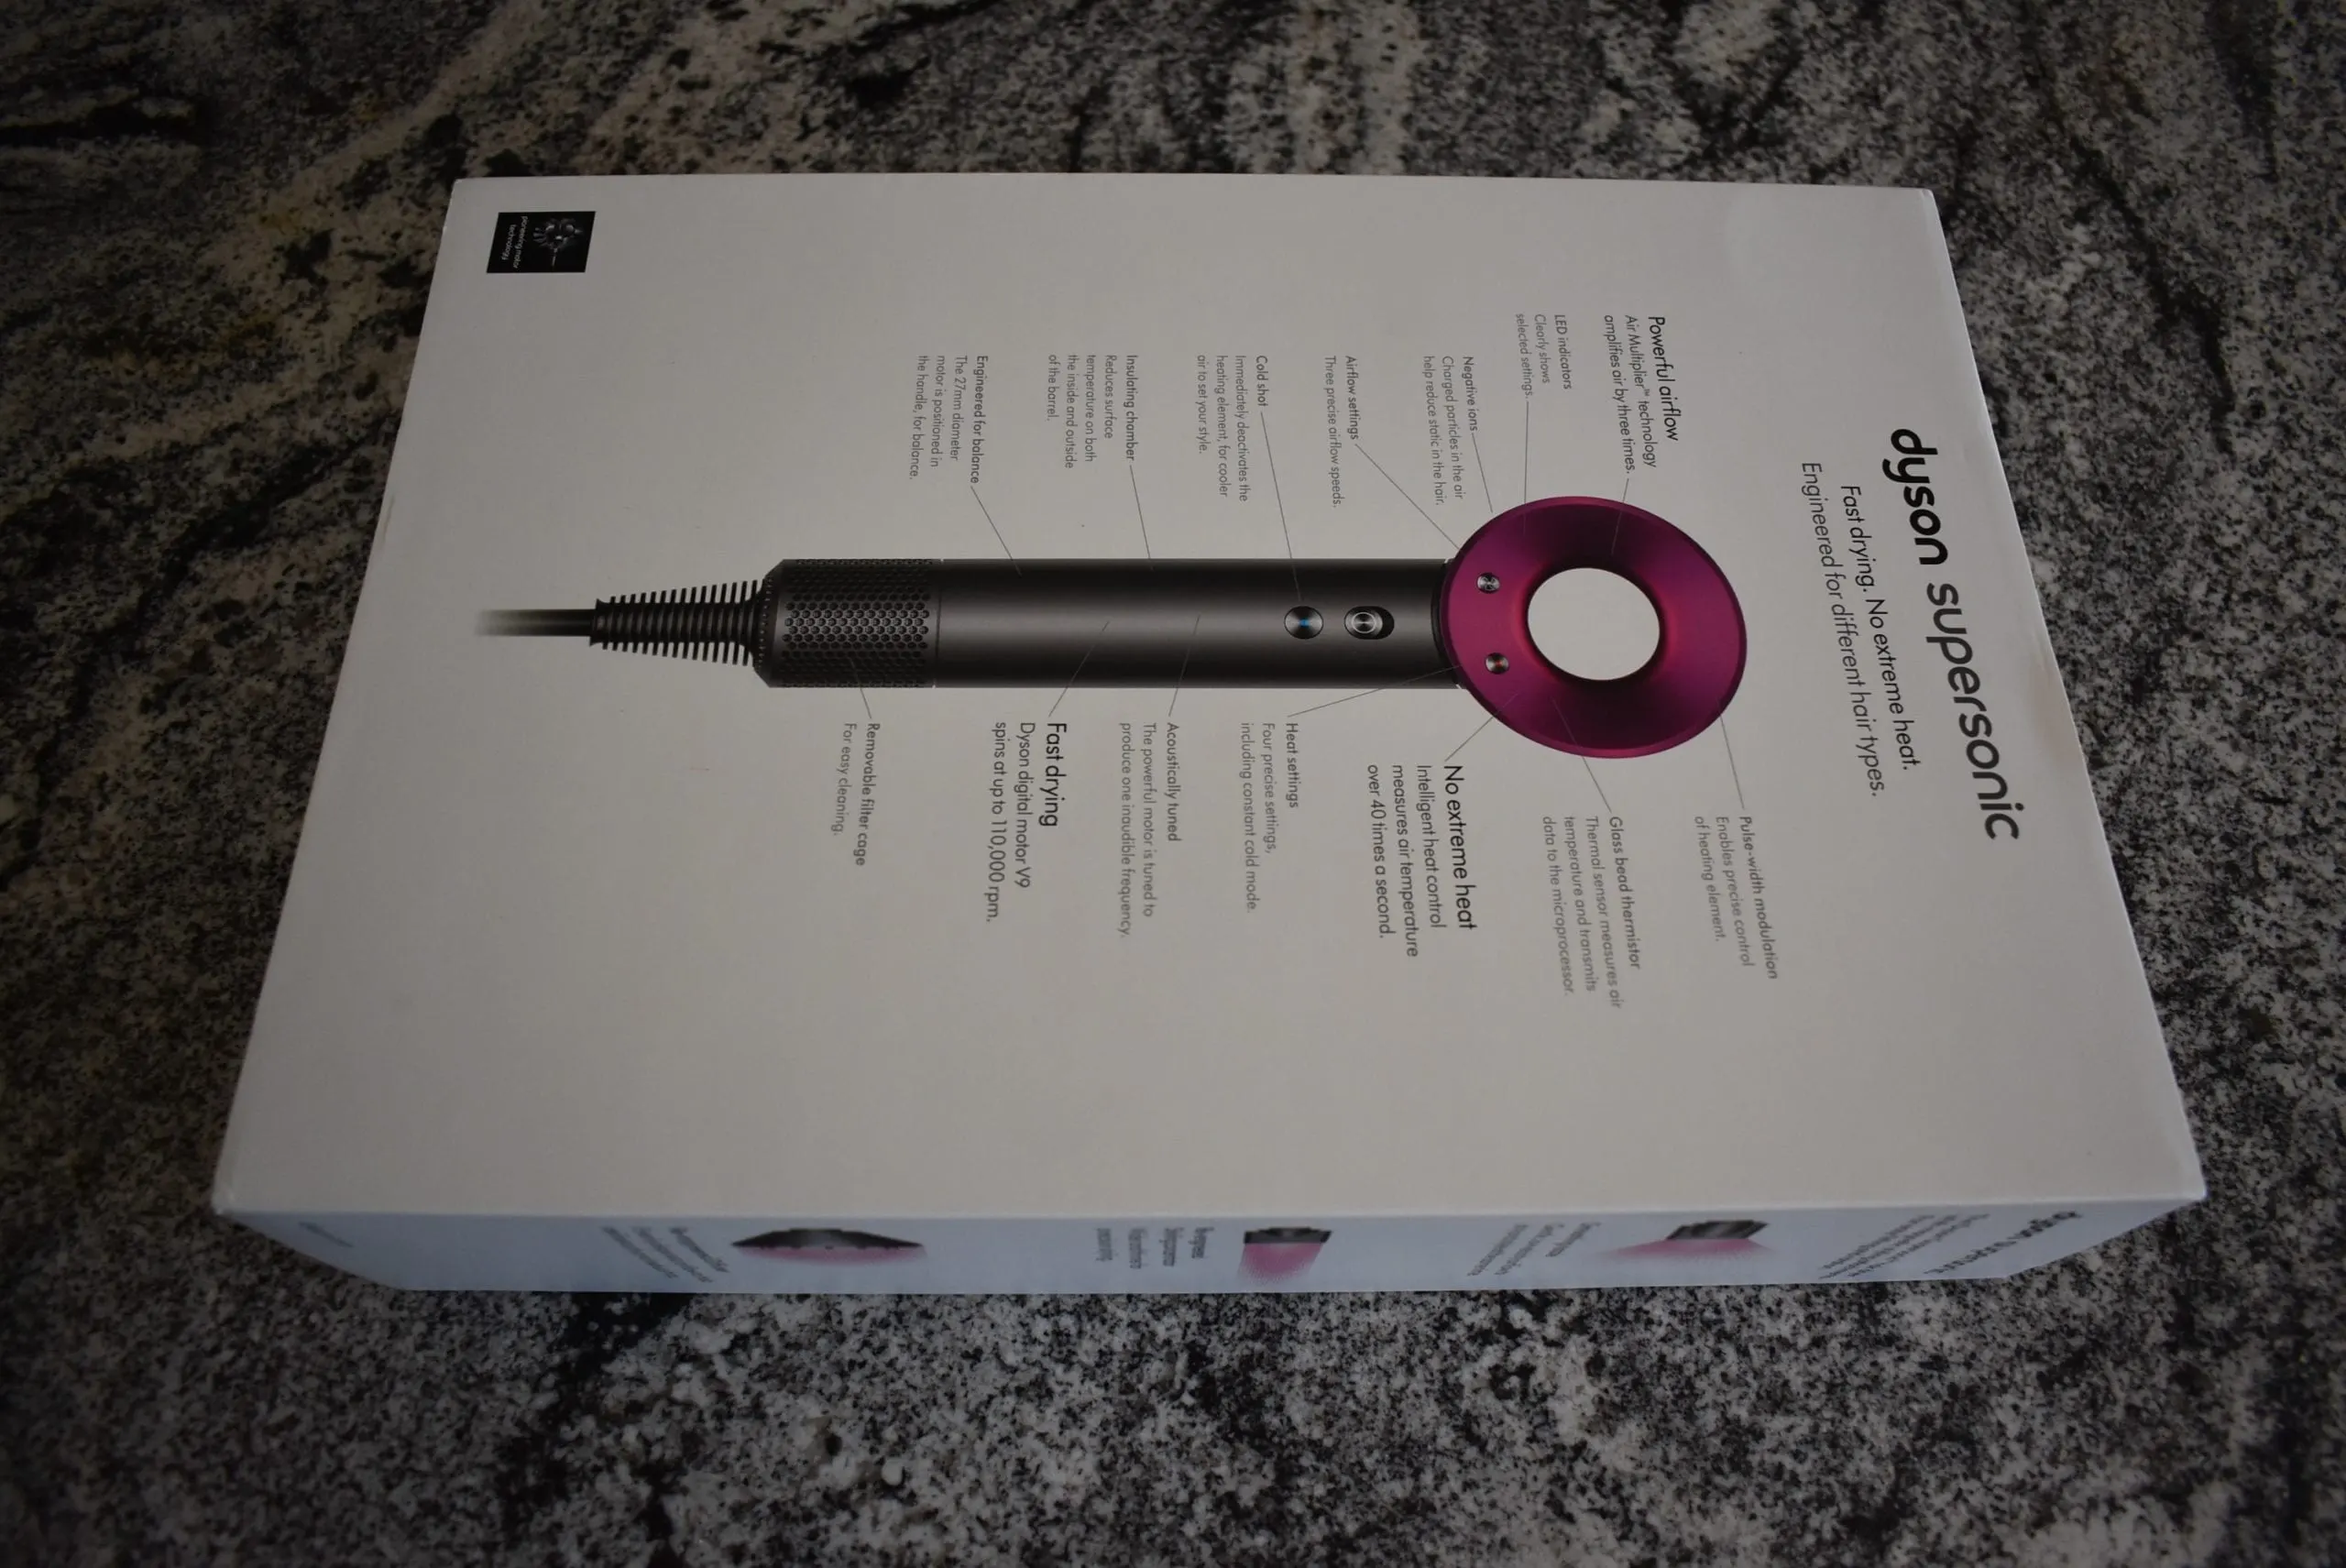 For a dyson hair dryer review, the retail box sits on a granite counter